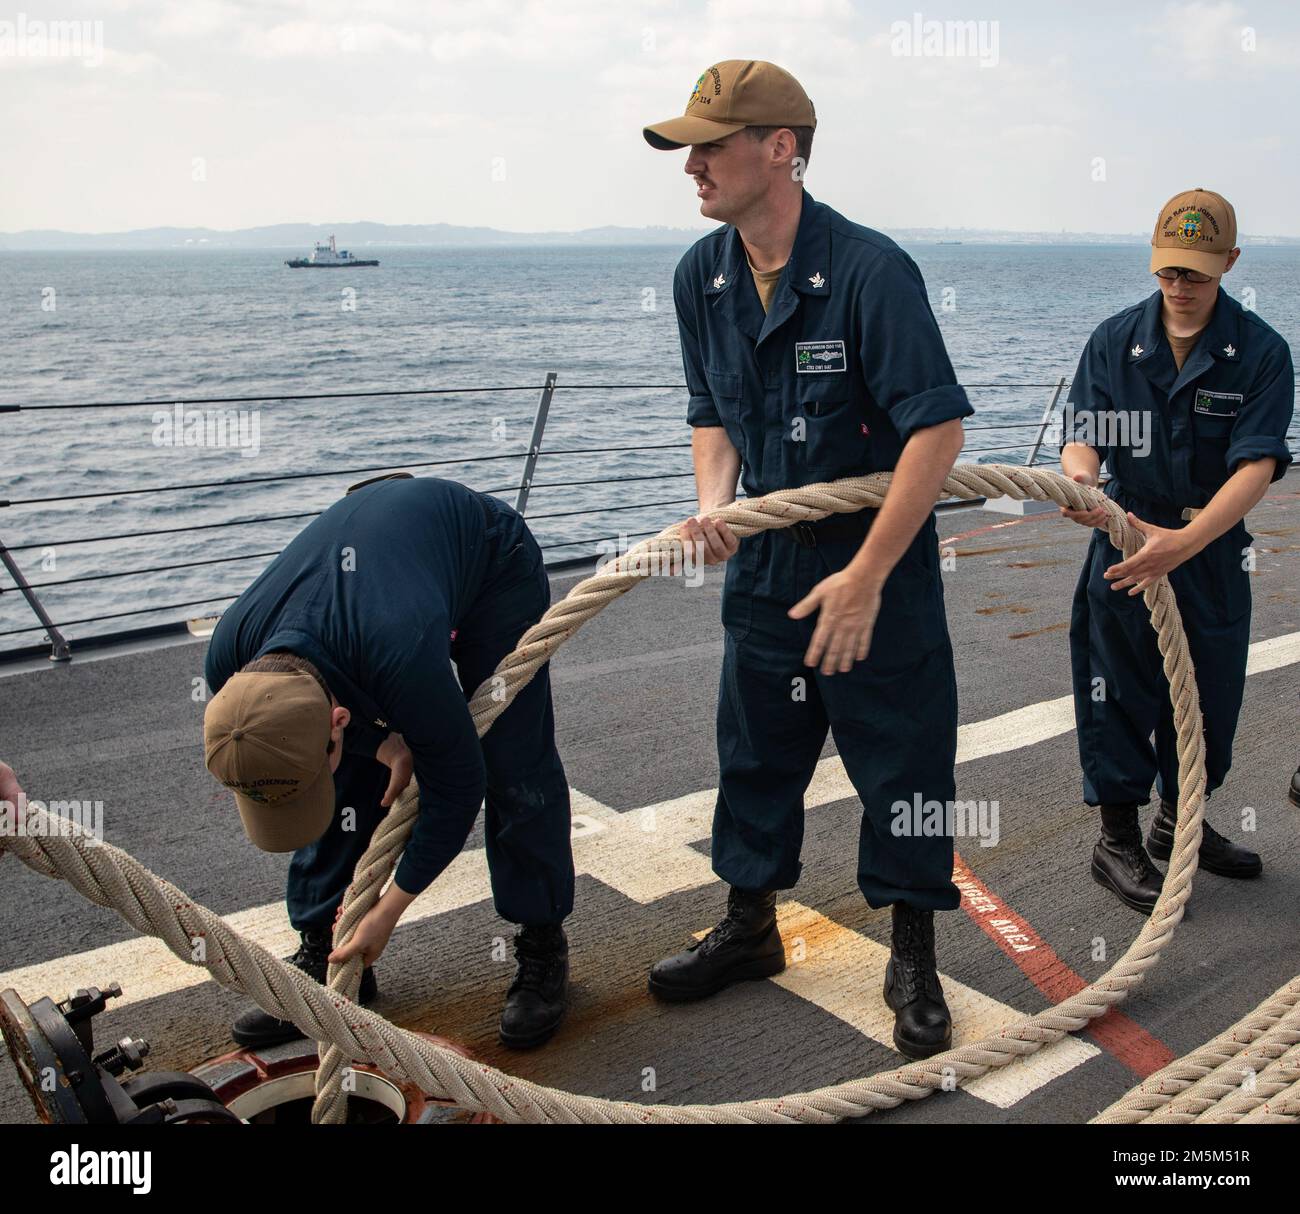 OKINAWA, Japan (March 24, 2022) Sailors pass a line below deck aboard Arleigh Burke-class guided-missile destroyer USS Ralph Johnson (DDG 114). Ralph Johnson is assigned to Task Force 71/Destroyer Squadron (DESRON) 15, the Navy’s largest forward-deployed DESRON and the U.S. 7th fleet’s principal surface force. Stock Photo